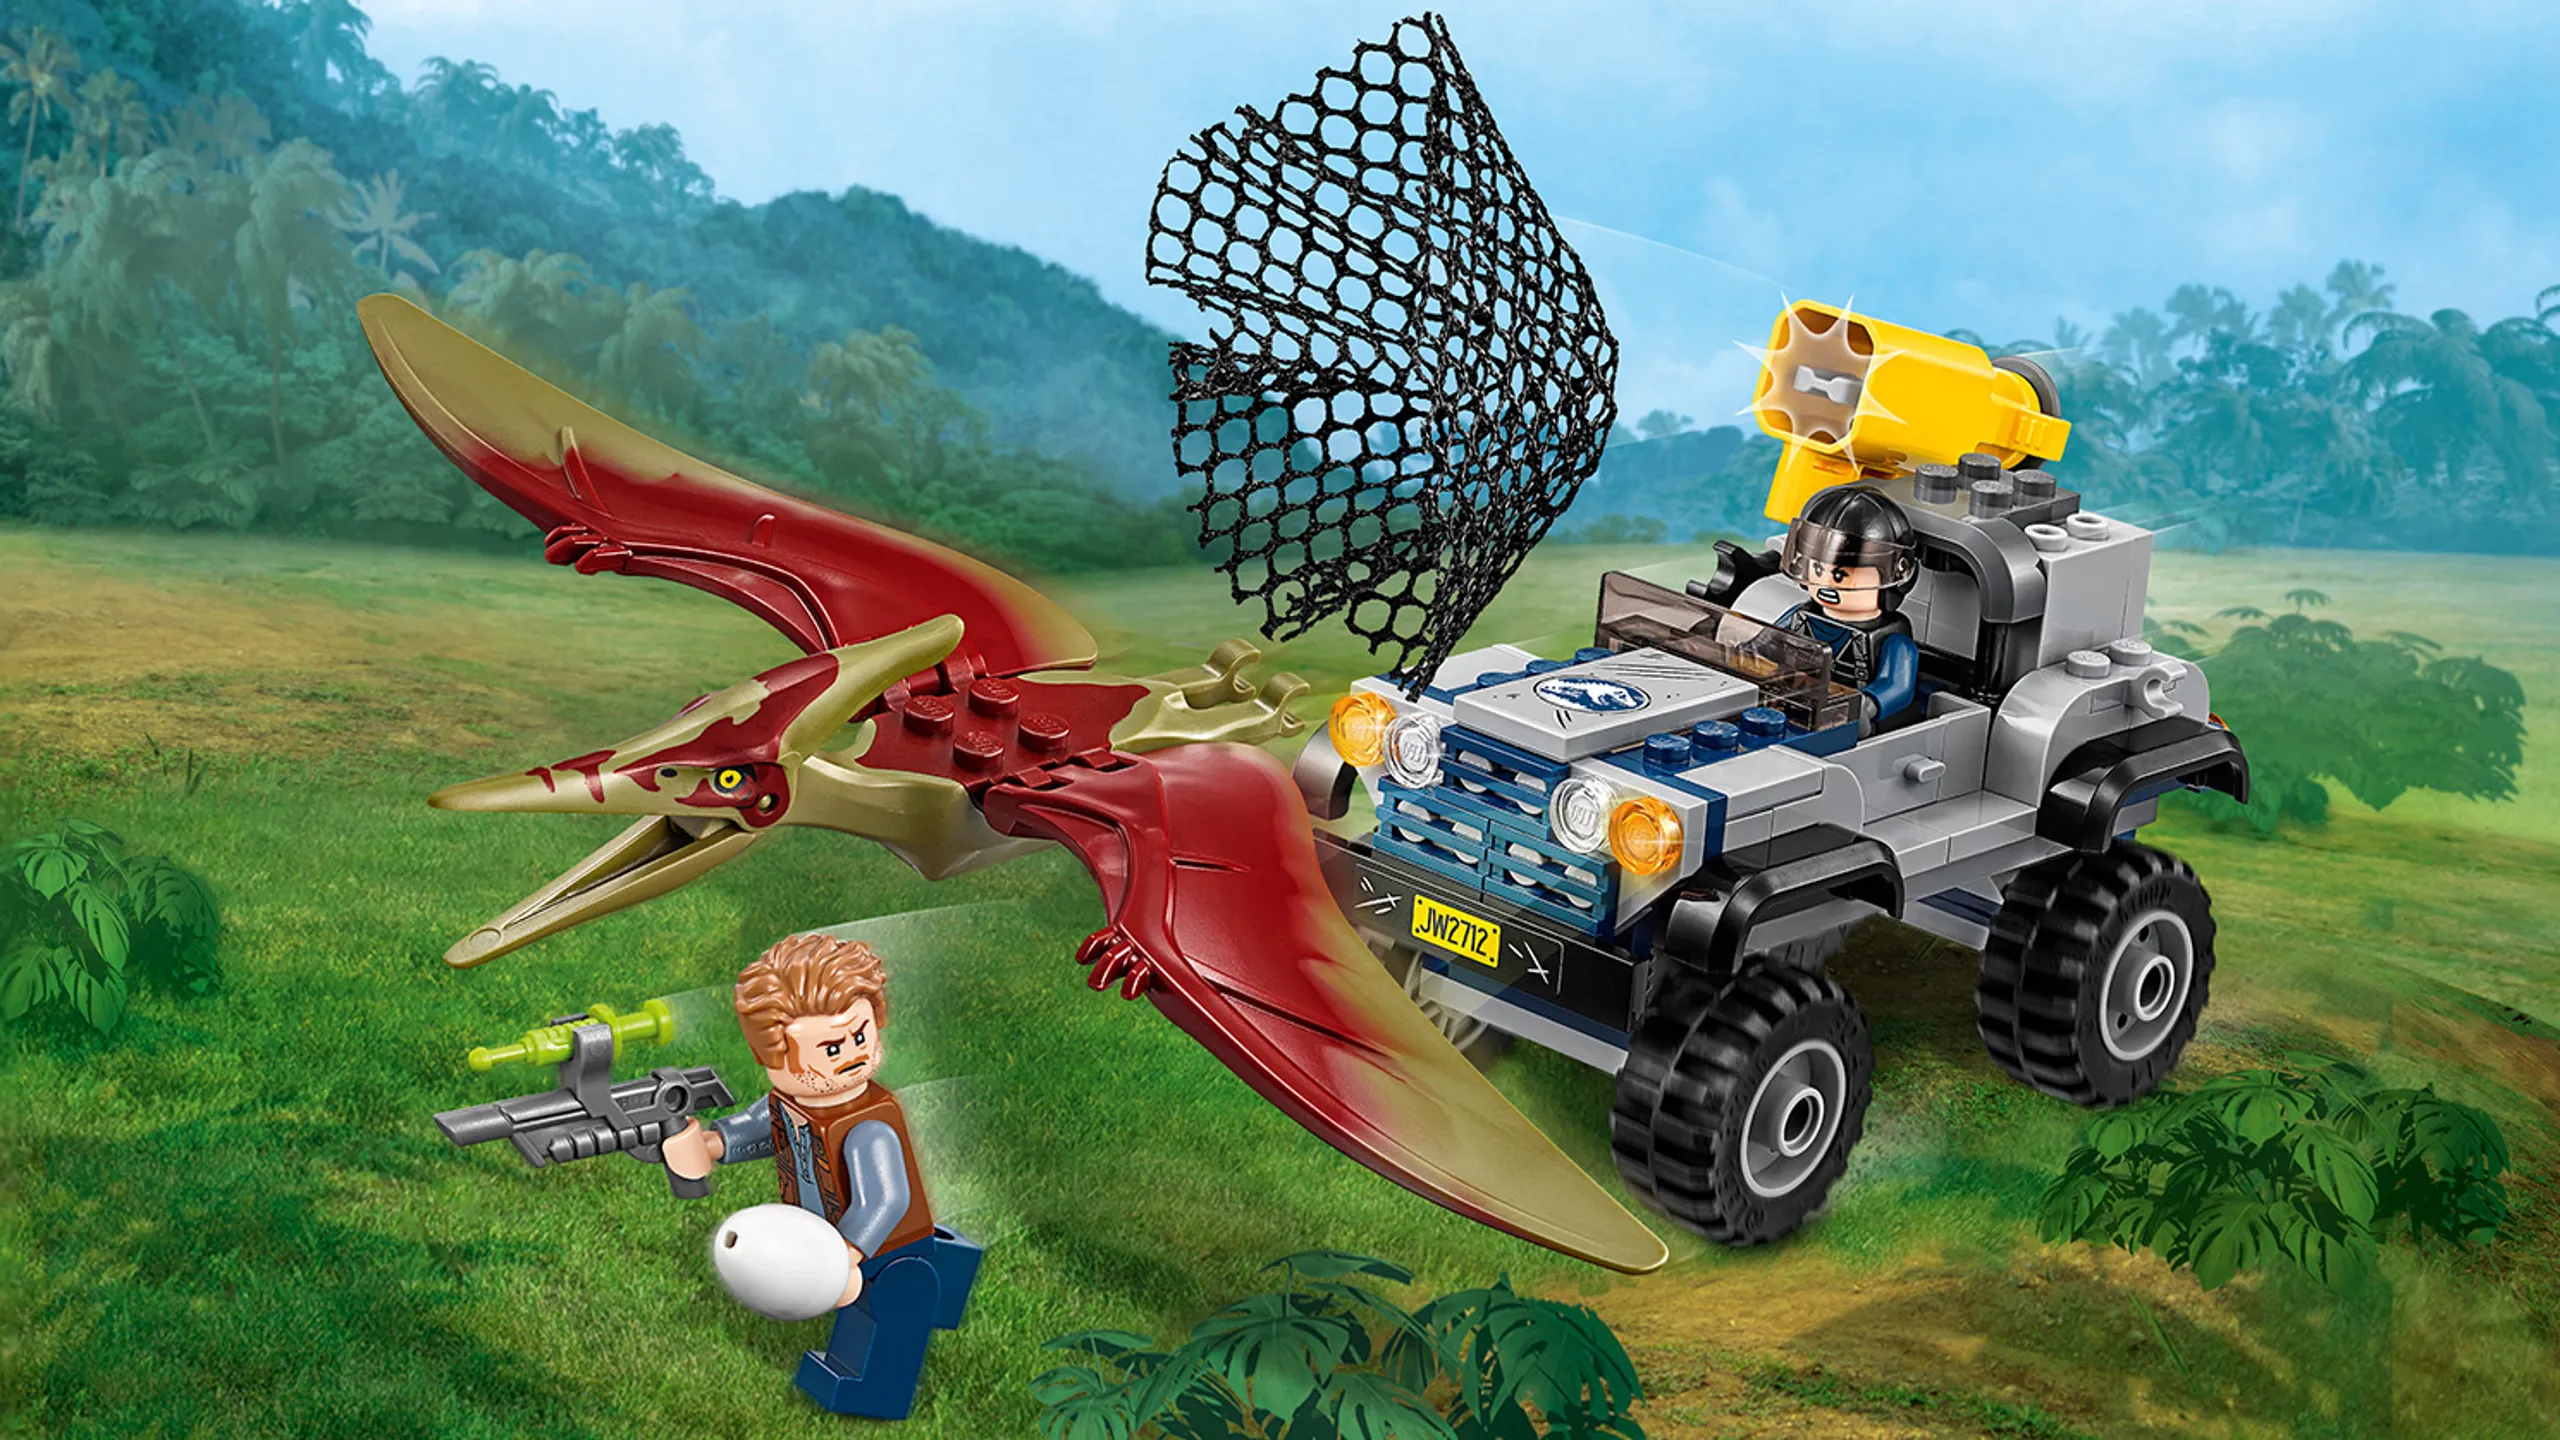 LEGO Jurassic World - 75926 Pteranodon Chase - Shoot with a big net from a buggy at the flying dinosaur to catch it so Owen can get away with the dinosaur egg.